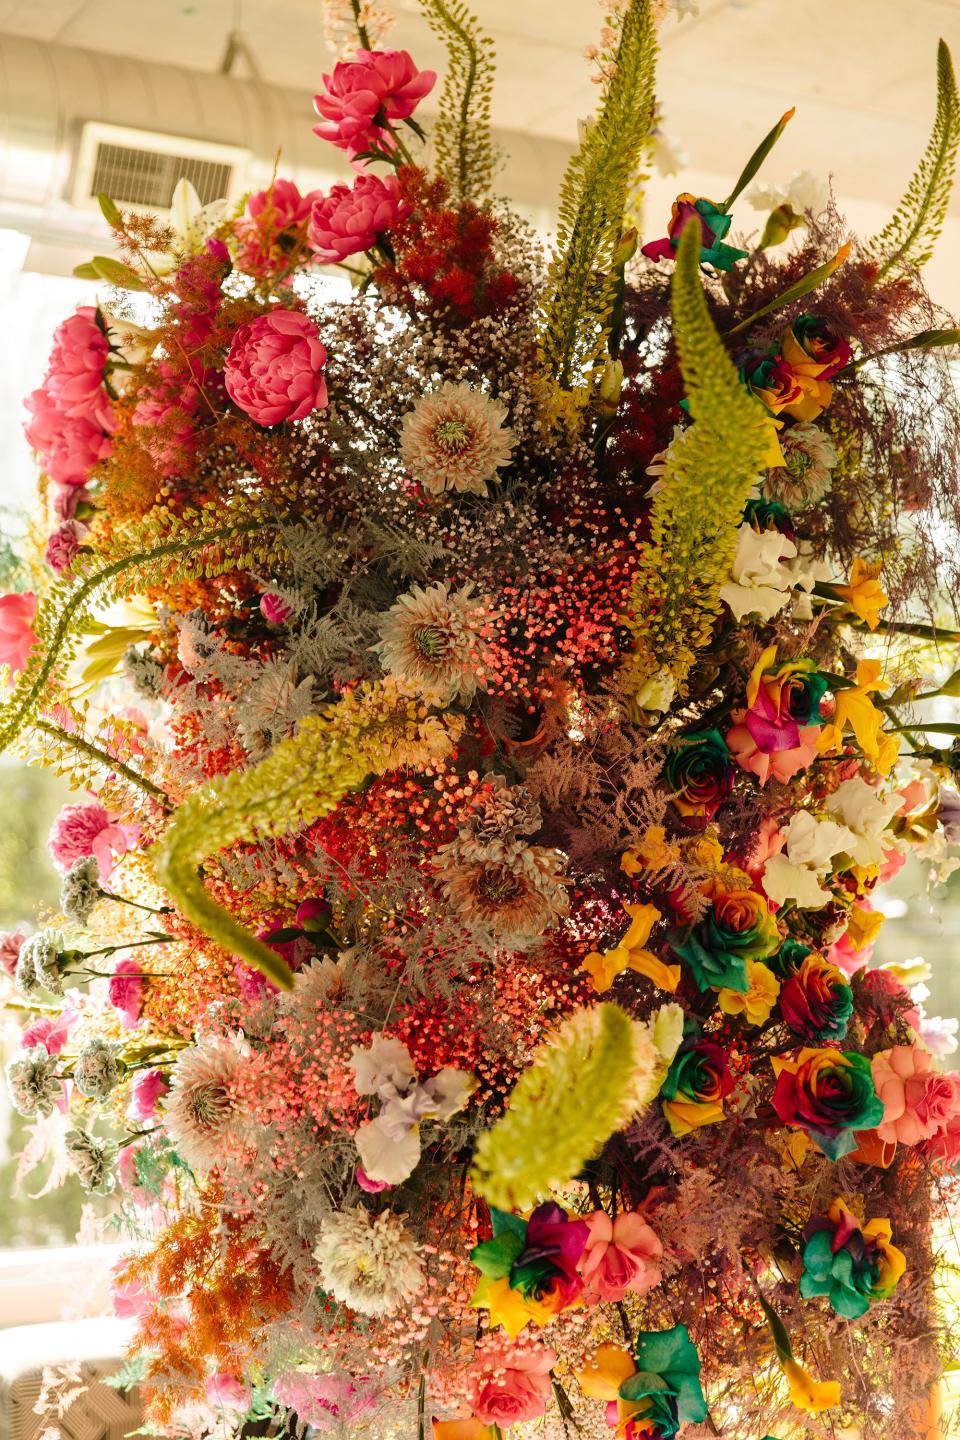 Nic Petersen’s floral installation. “It was like an alien being, sent to earth for the weekend to make people happy,” Broccoli founder Anja Charbonneau reflected later.